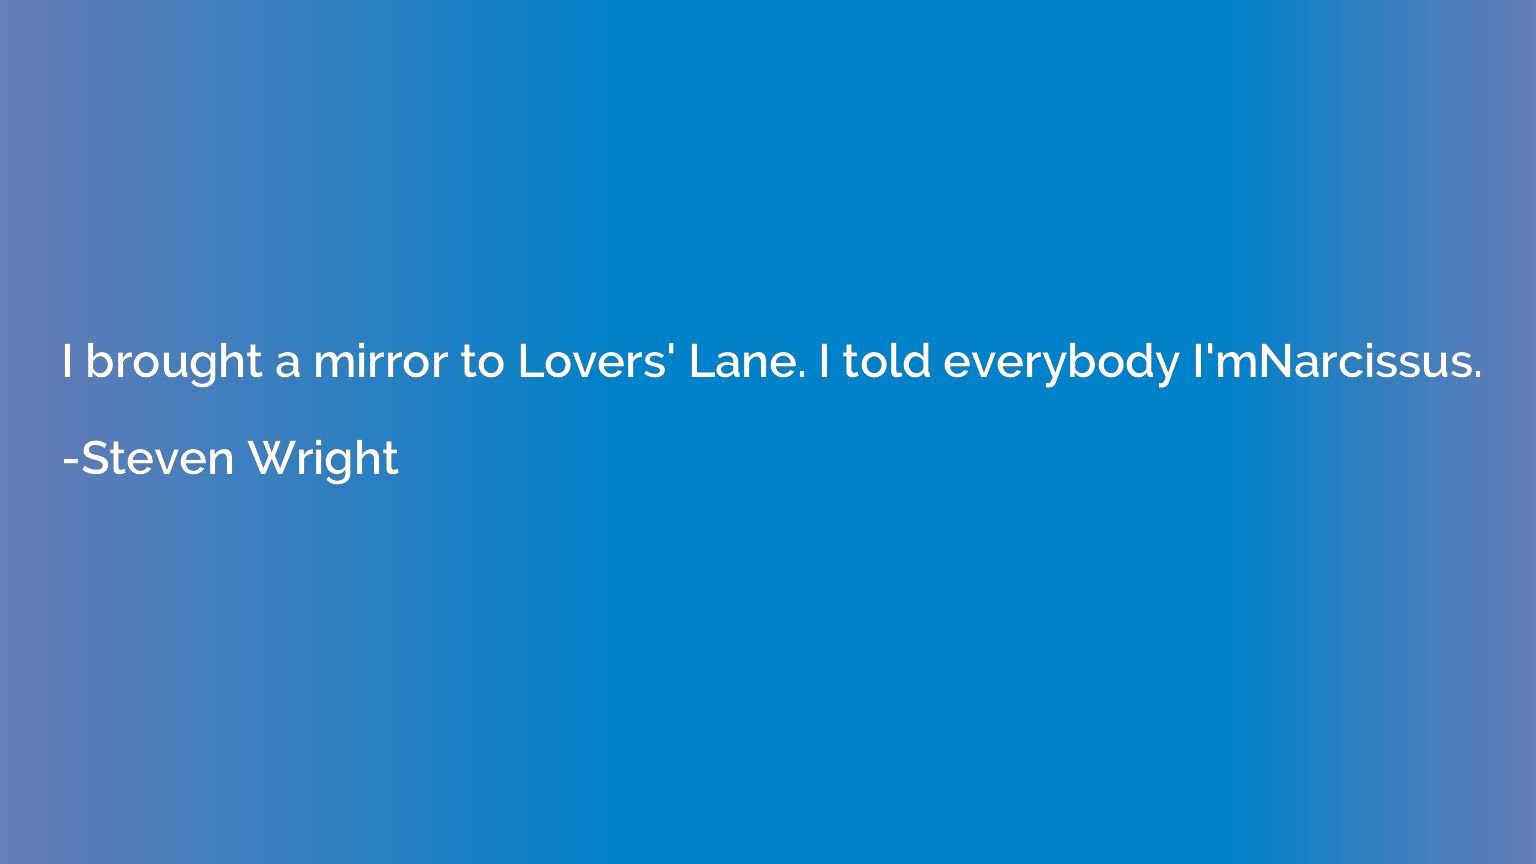 I brought a mirror to Lovers' Lane. I told everybody I'mNarc